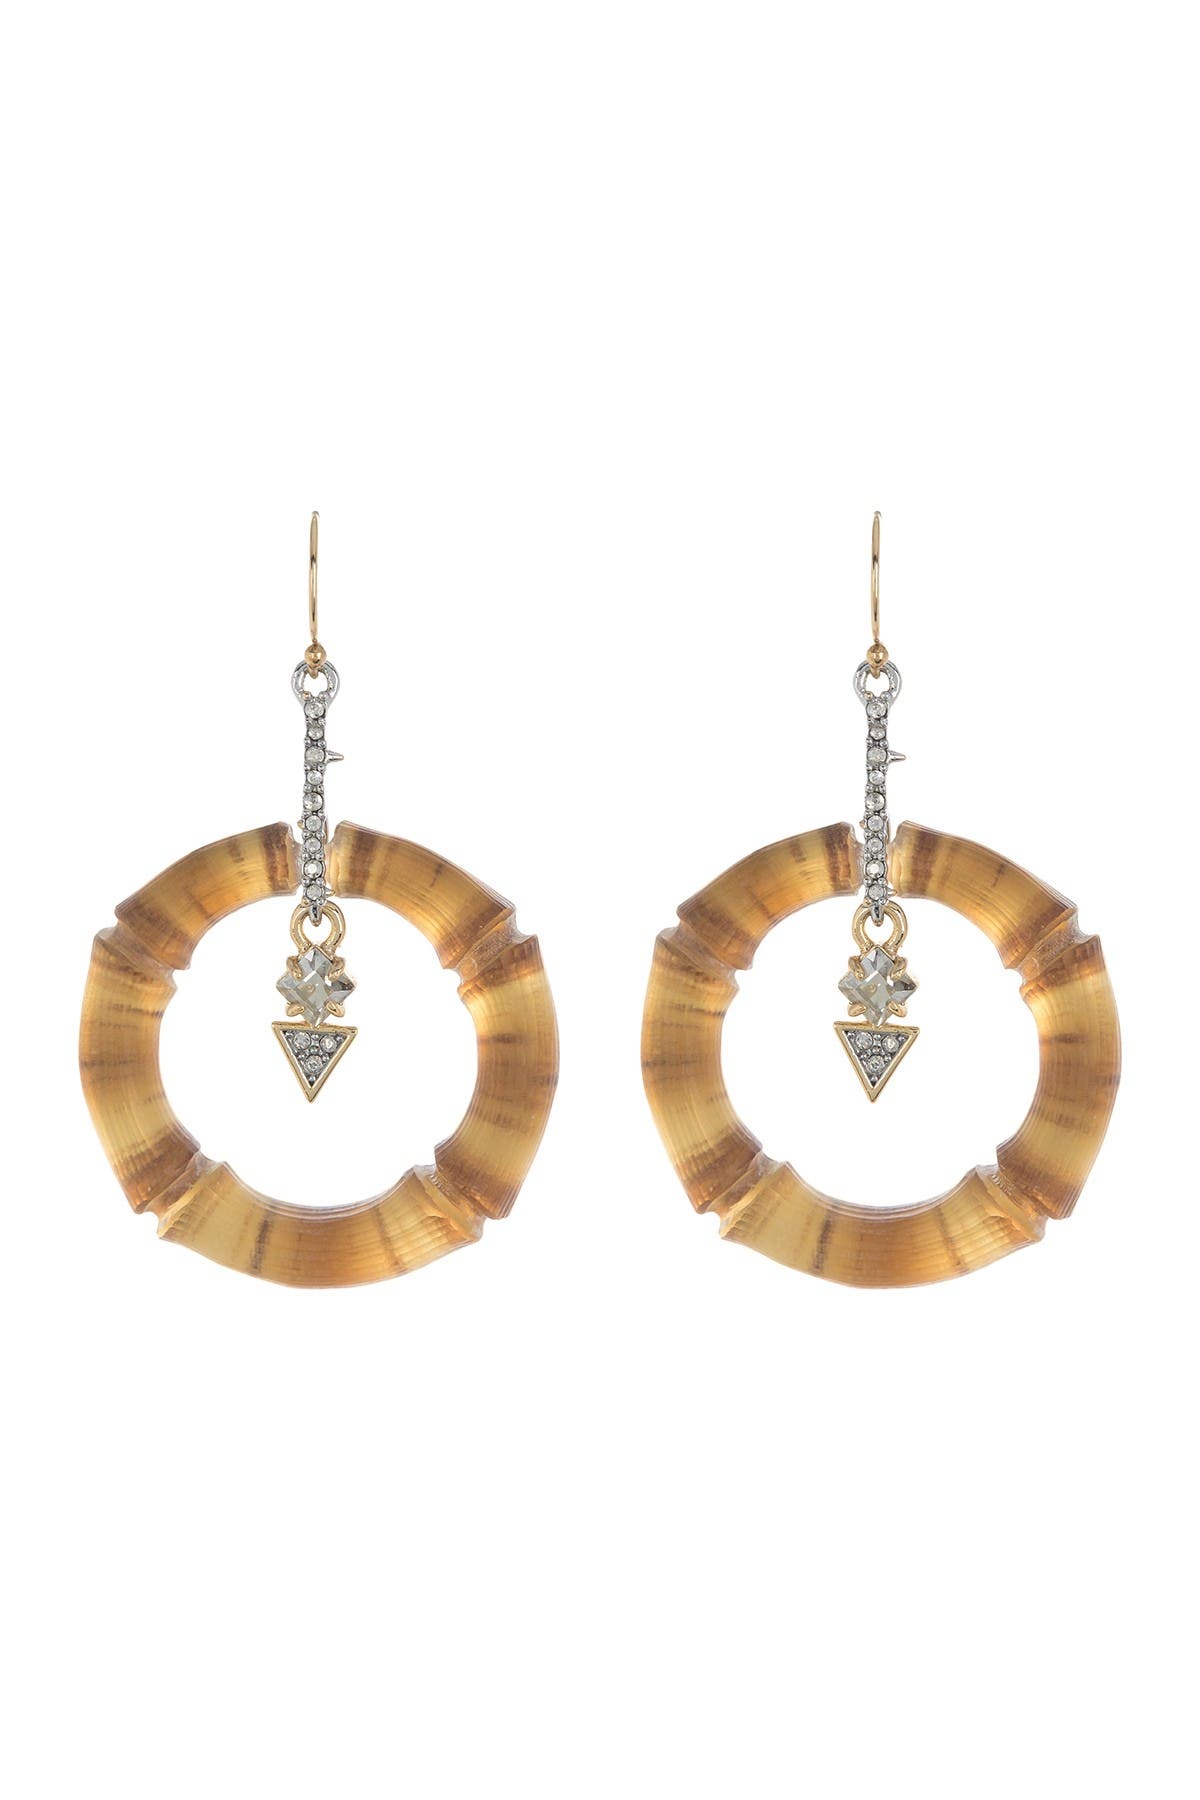 Alexis Bittar Dangling Bamboo Wire Earrings In Gld Bmboo